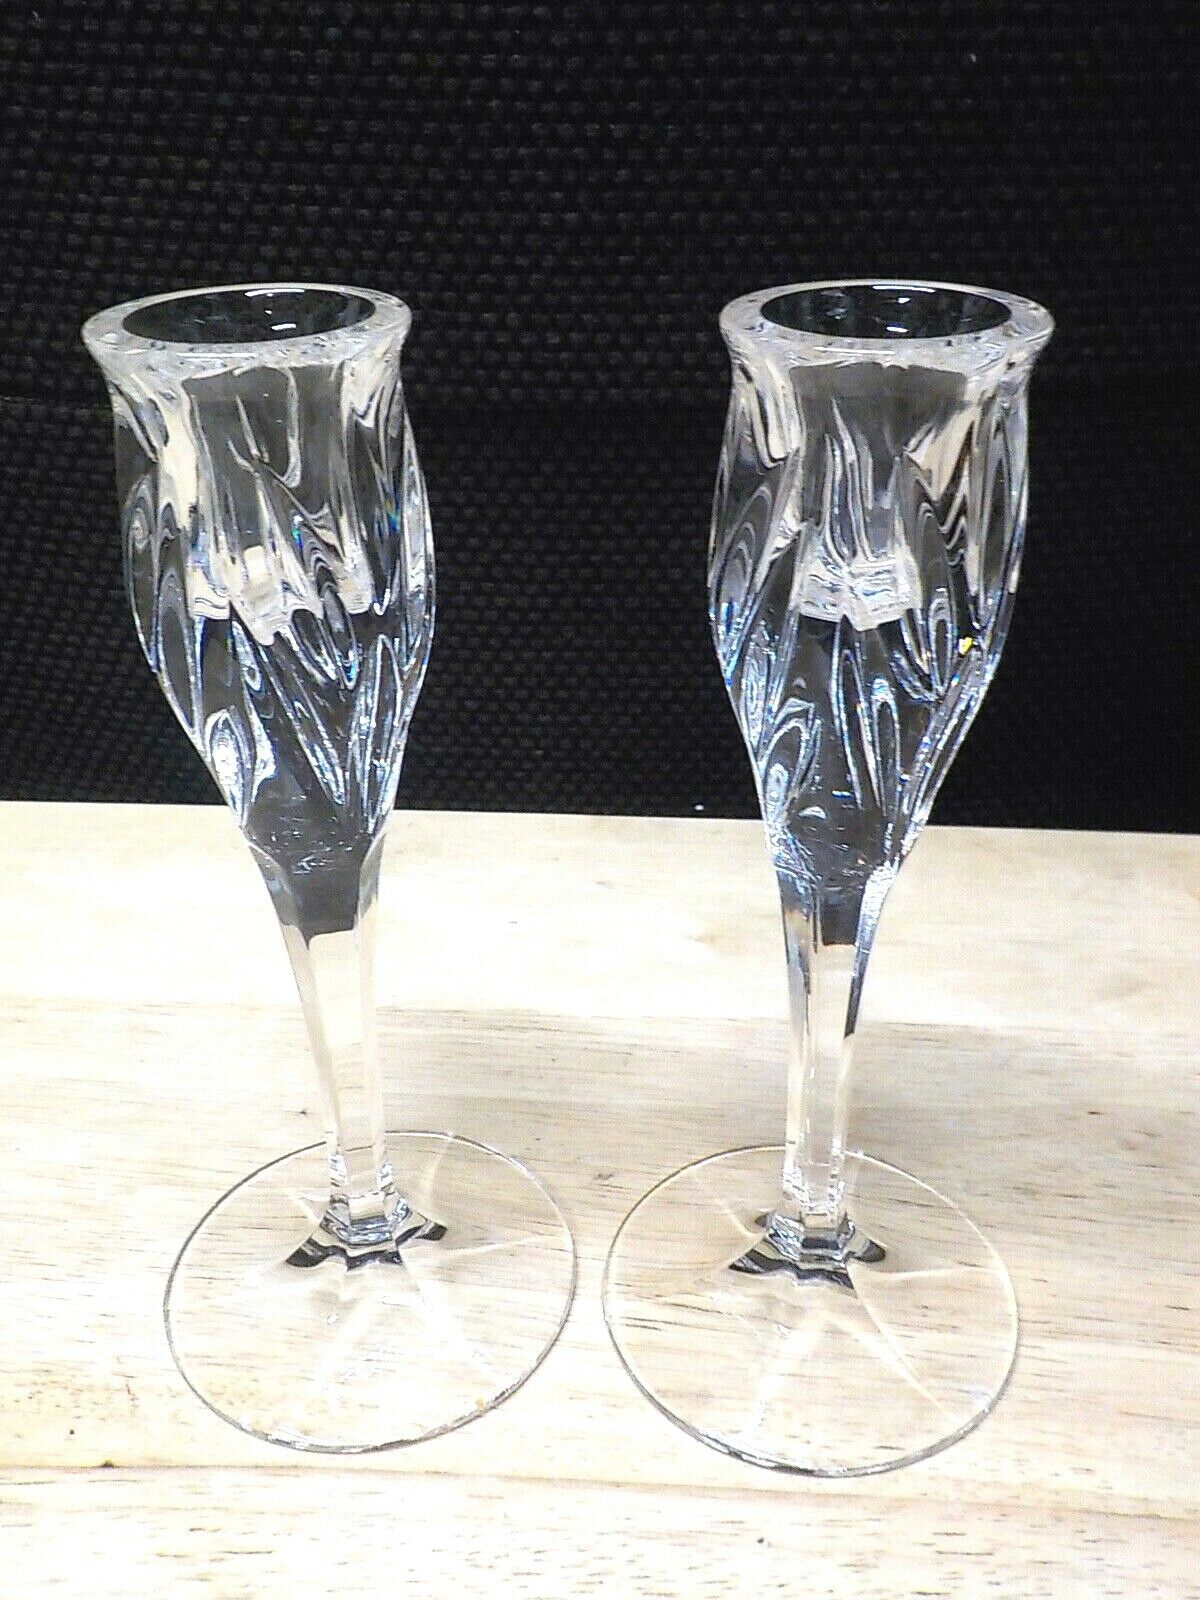 GORGEOUS PAIR OF CRYSTAL CANDLE STICKS OR HOLDERS